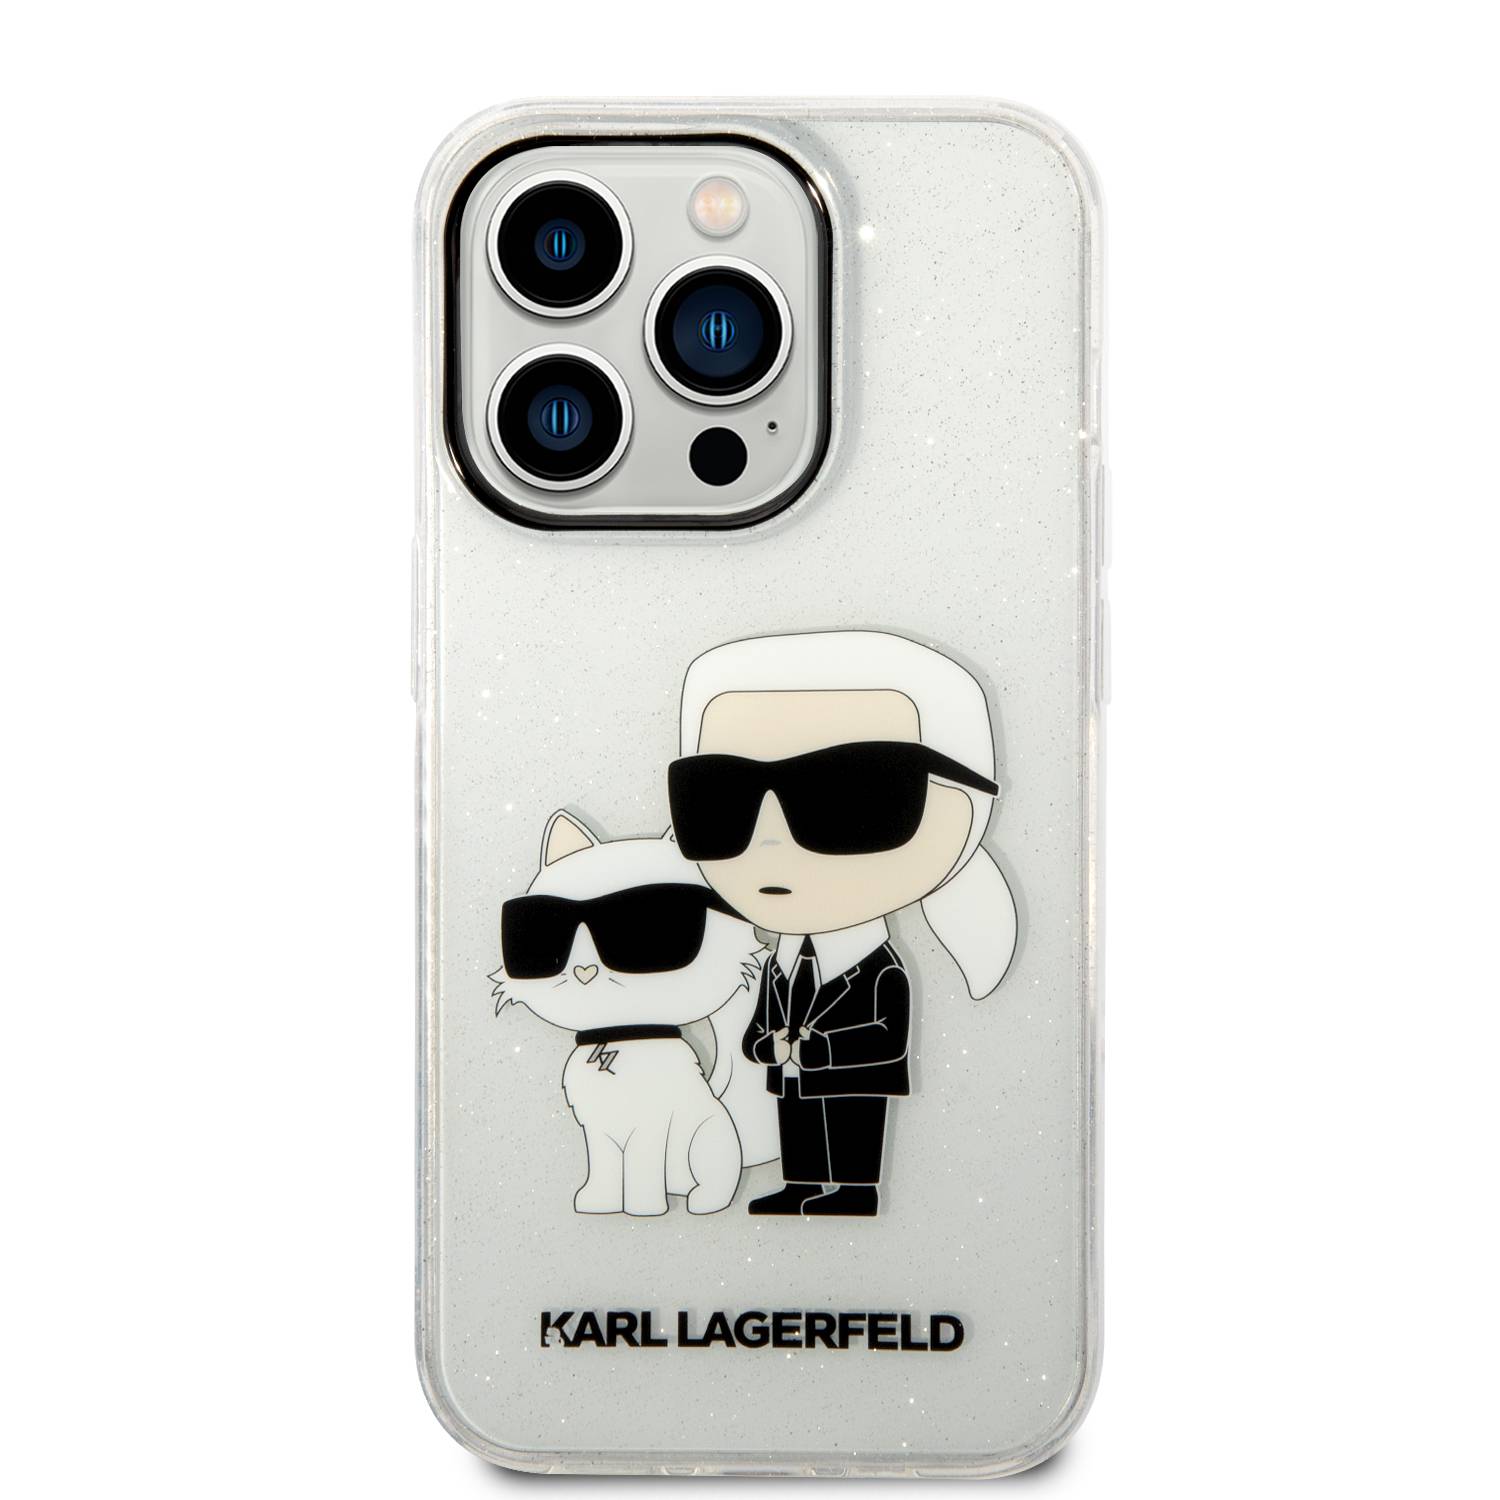 images/stories/virtuemart/product/Karl_Lagerfeld_Hard_Case_IML_Glit_NFT_Karl___Choupette_iPhone_14_Pro_Max___Clear_2__1671537525_531